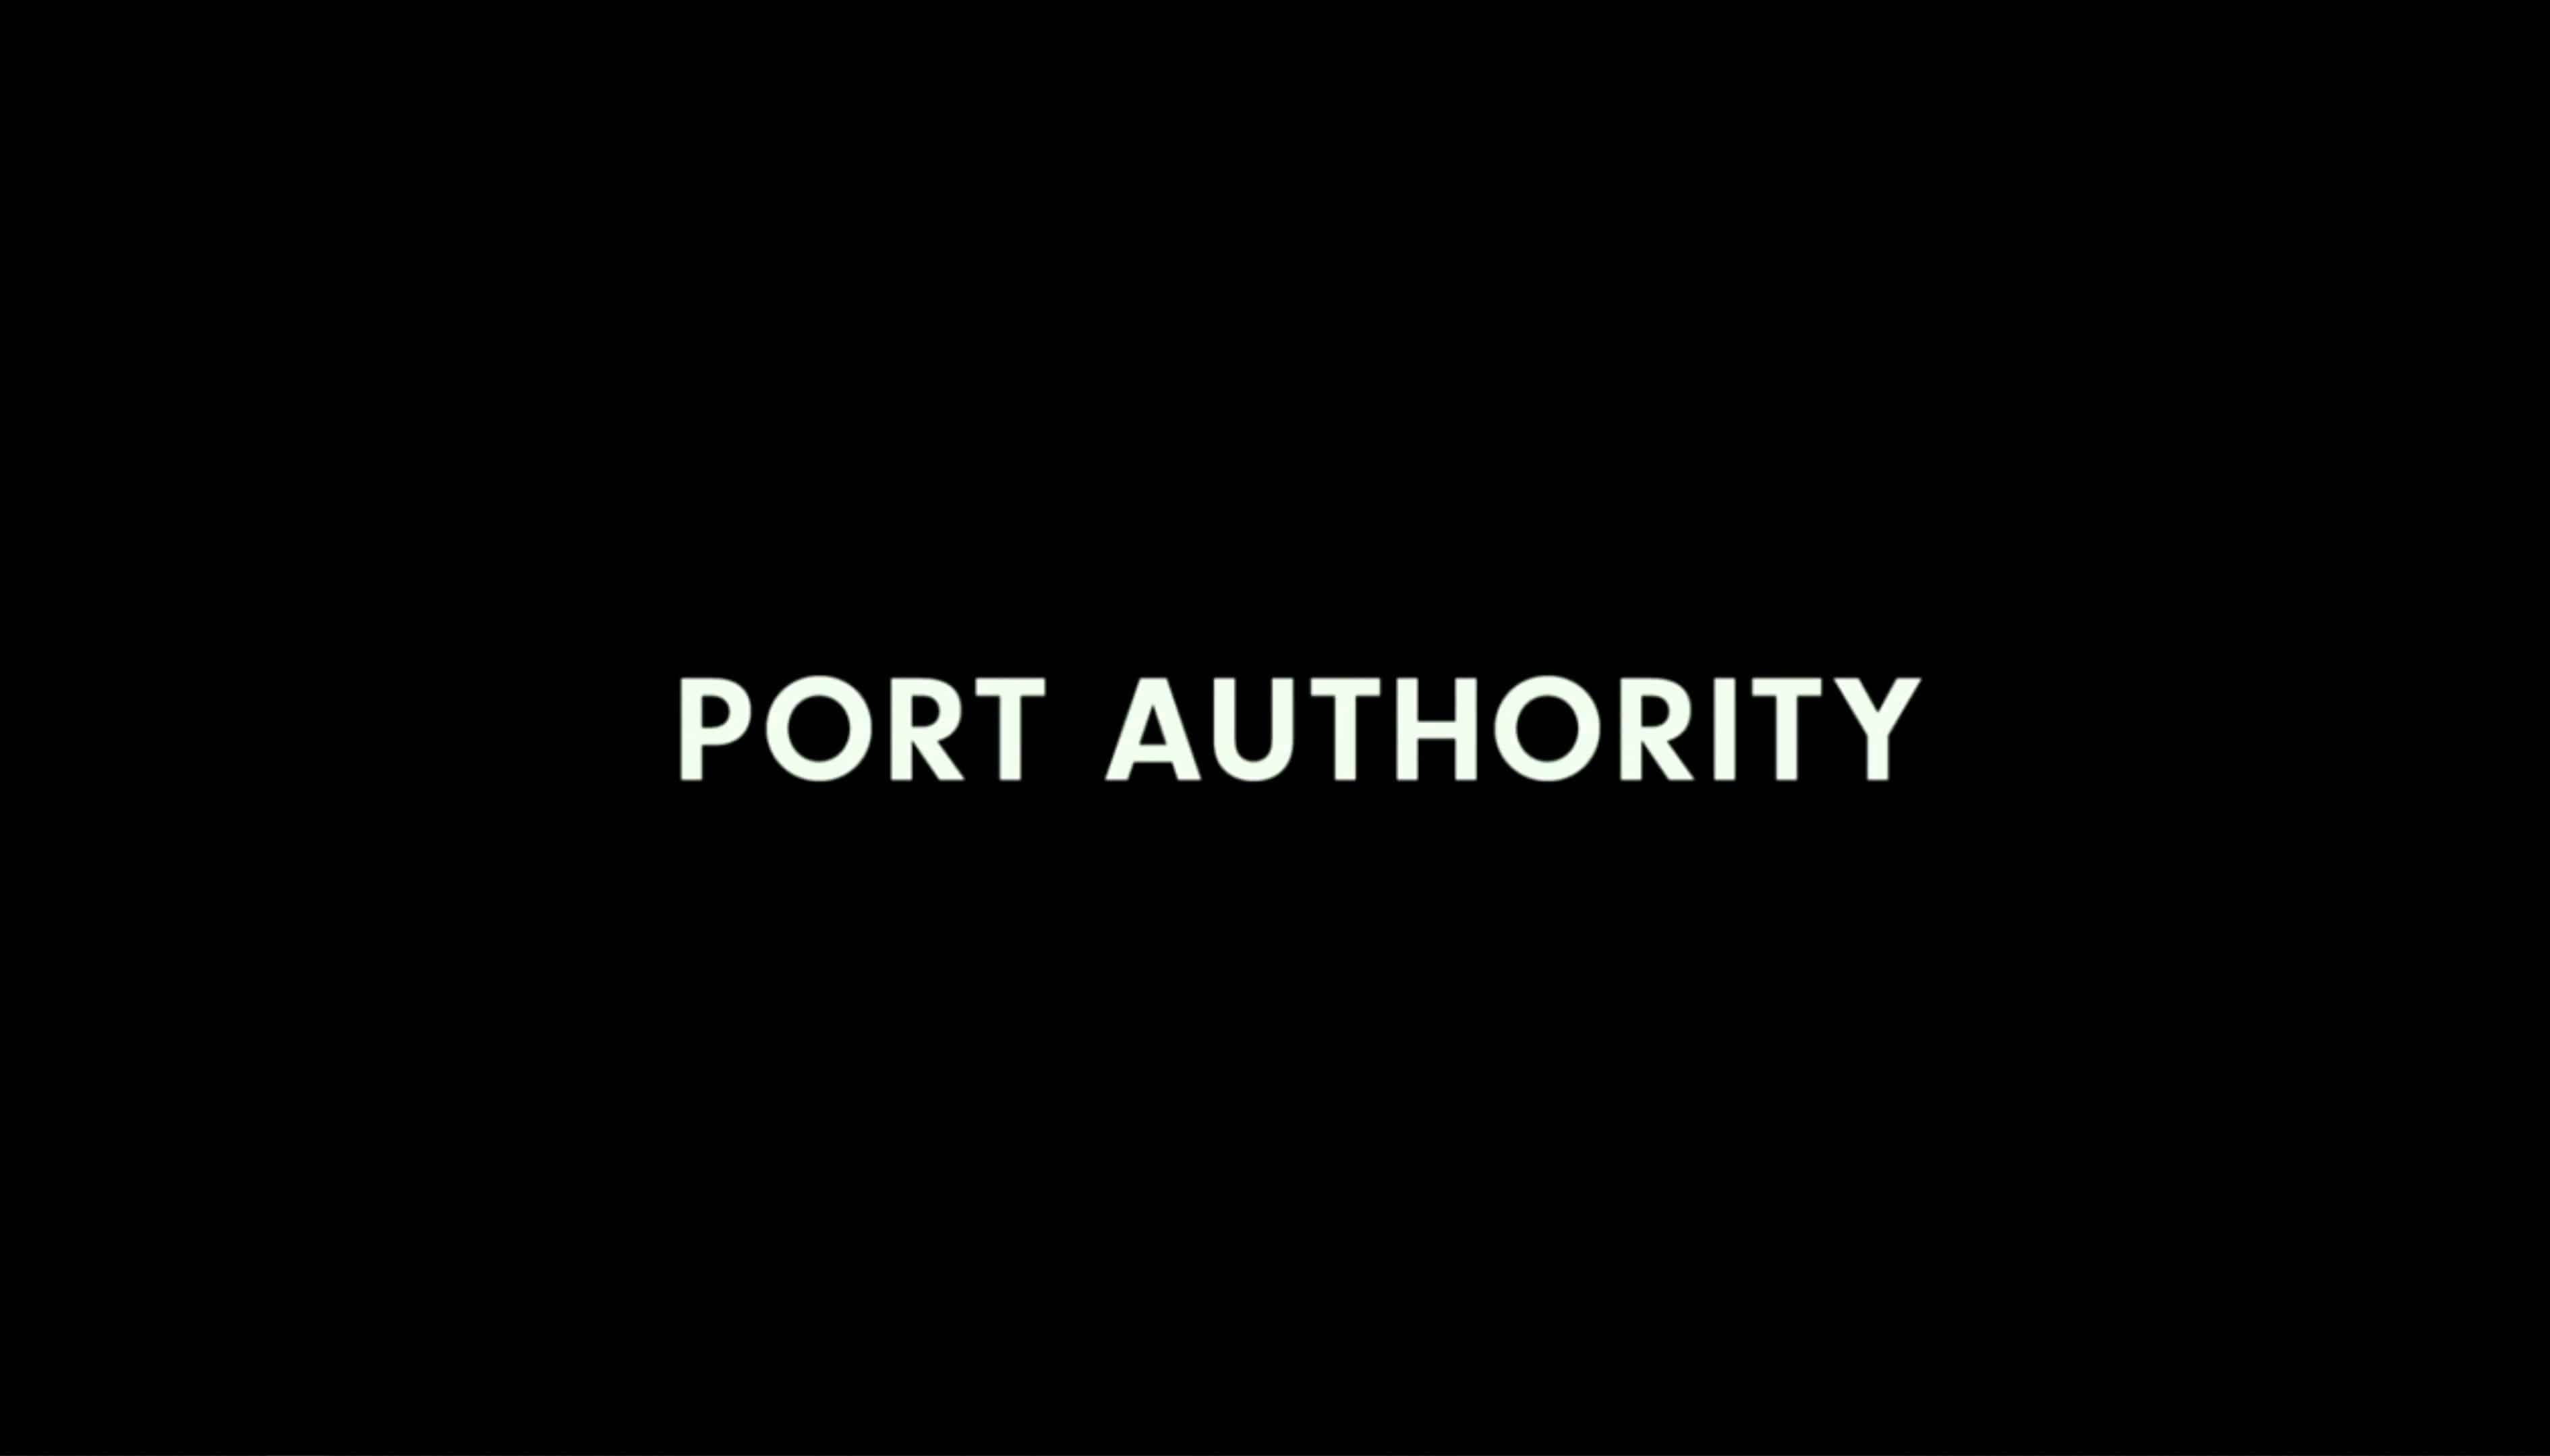 Port Authortiy (2021) – Review/ Summary (with Spoilers)